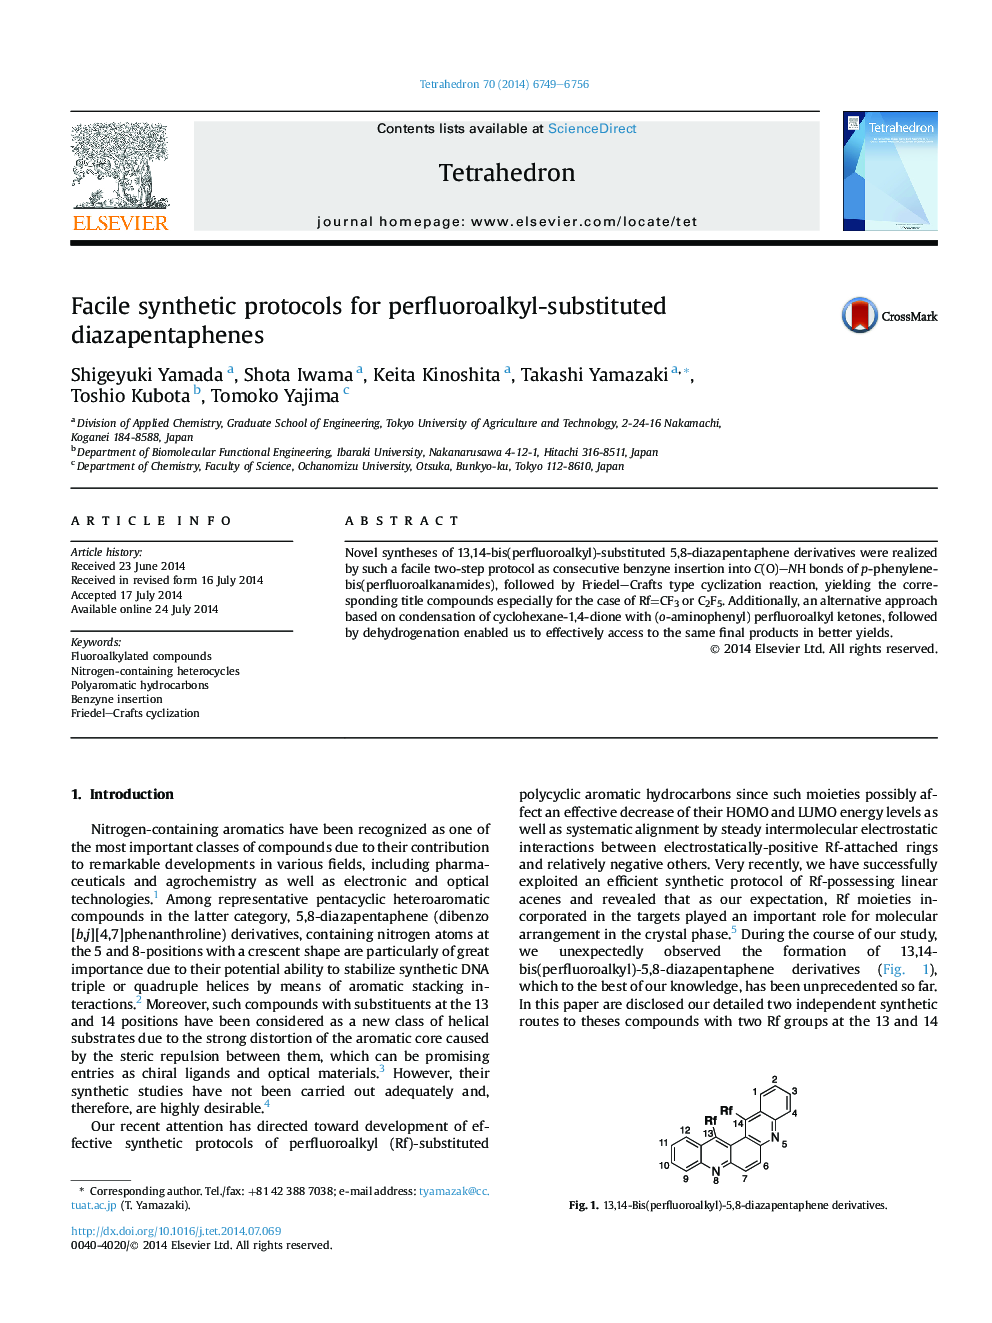 Facile synthetic protocols for perfluoroalkyl-substituted diazapentaphenes